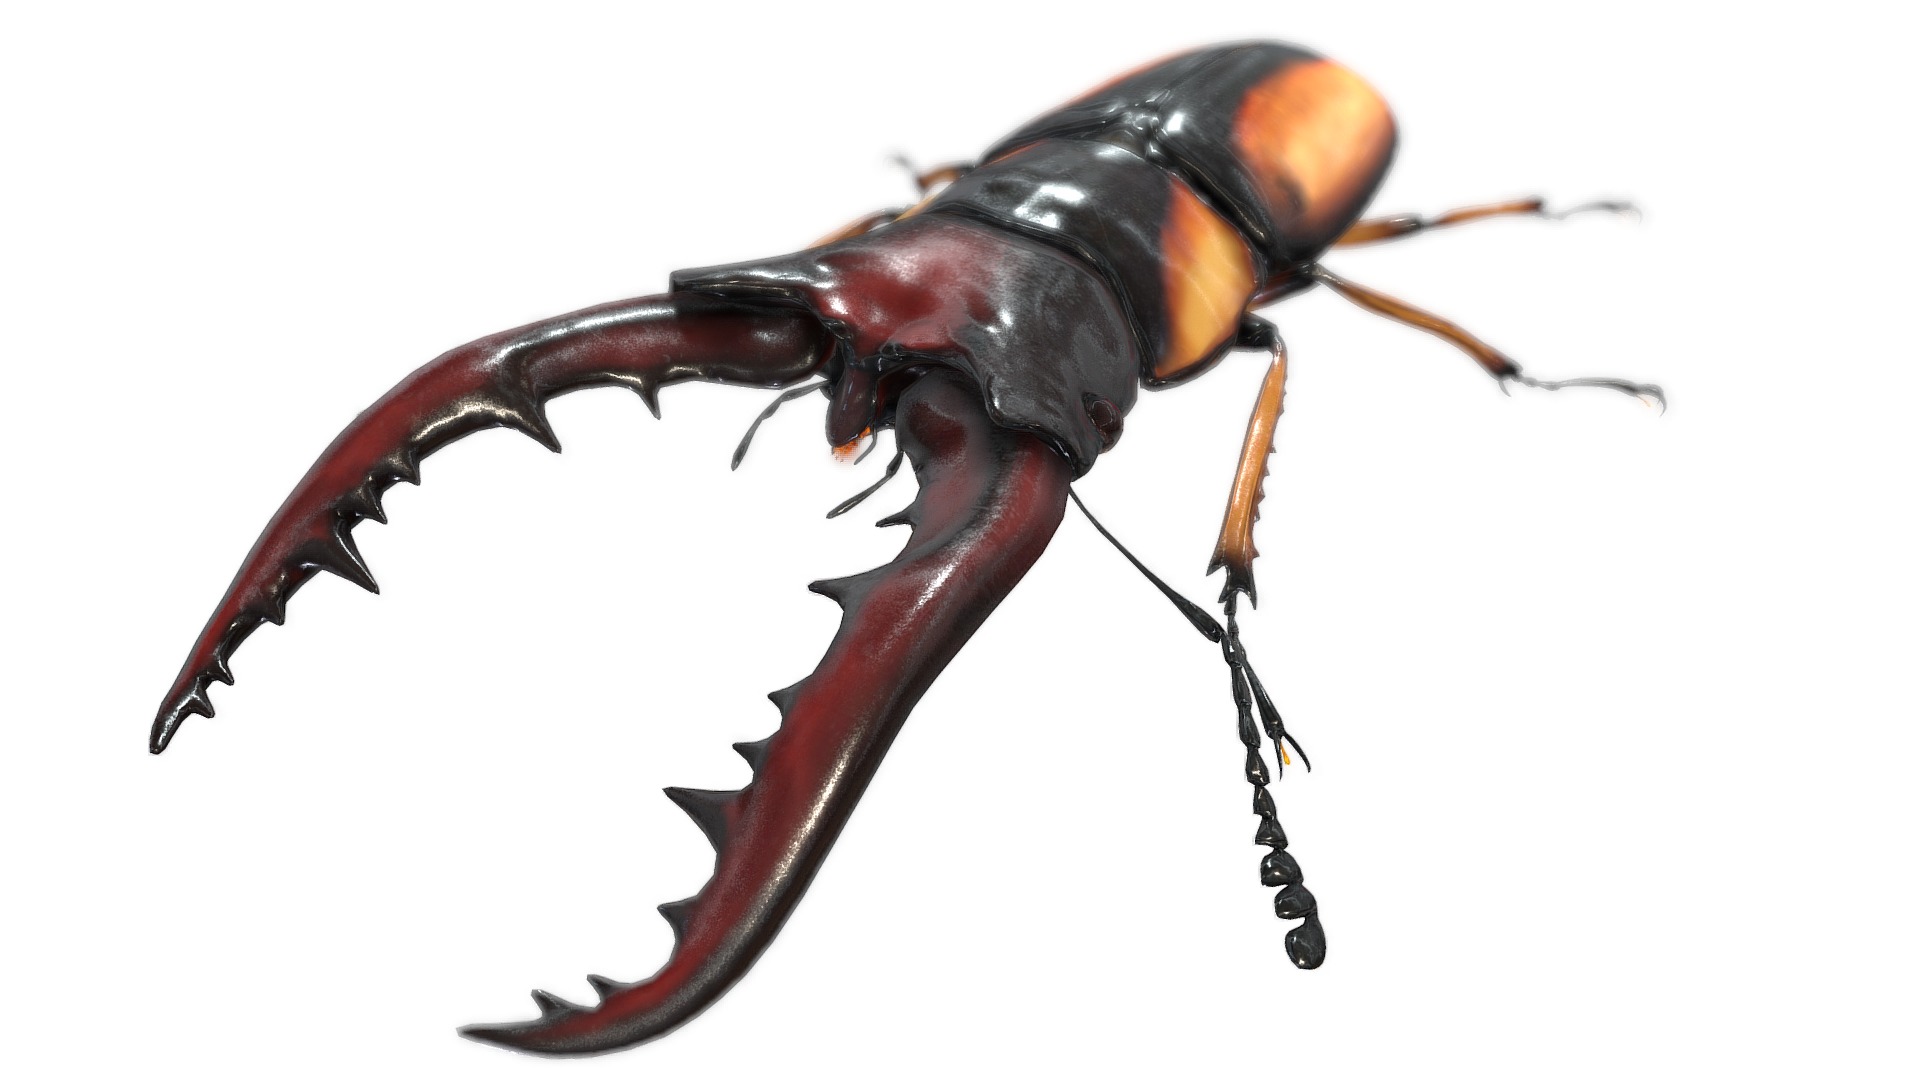 3D model Prosopocoilus savagei - This is a 3D model of the Prosopocoilus savagei. The 3D model is about a close up of a bug.